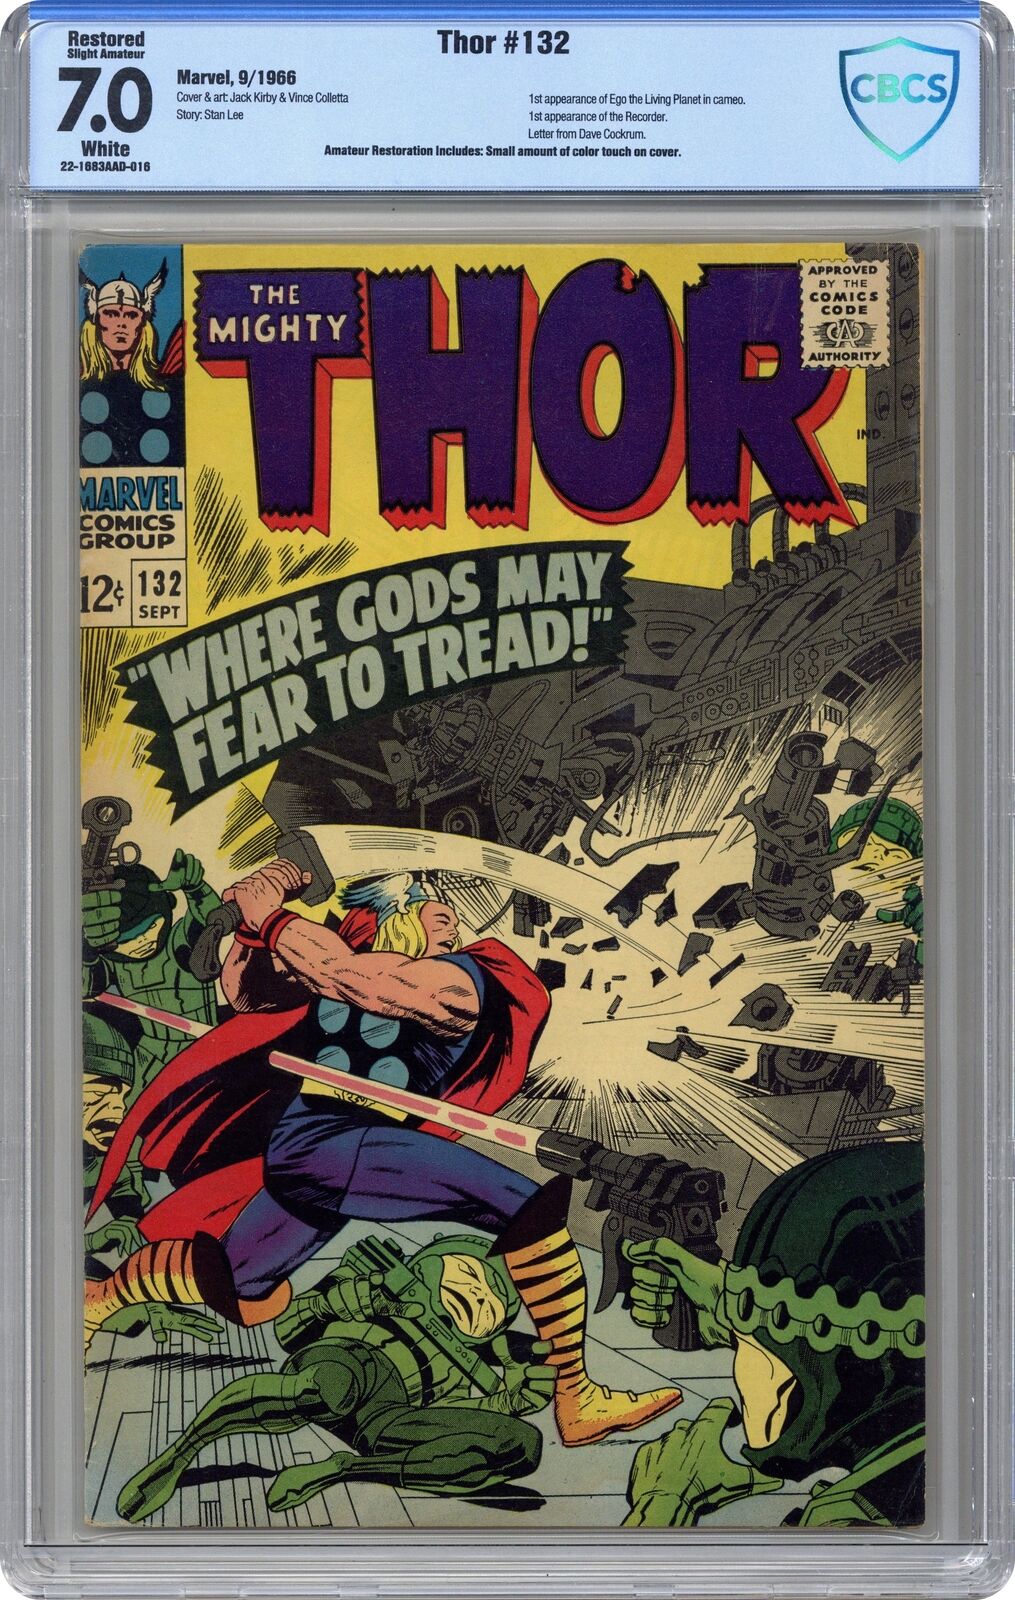 Thor #132 CBCS 7.0 1966 22-1683AAD-016 1st app. Ego the Living Planet